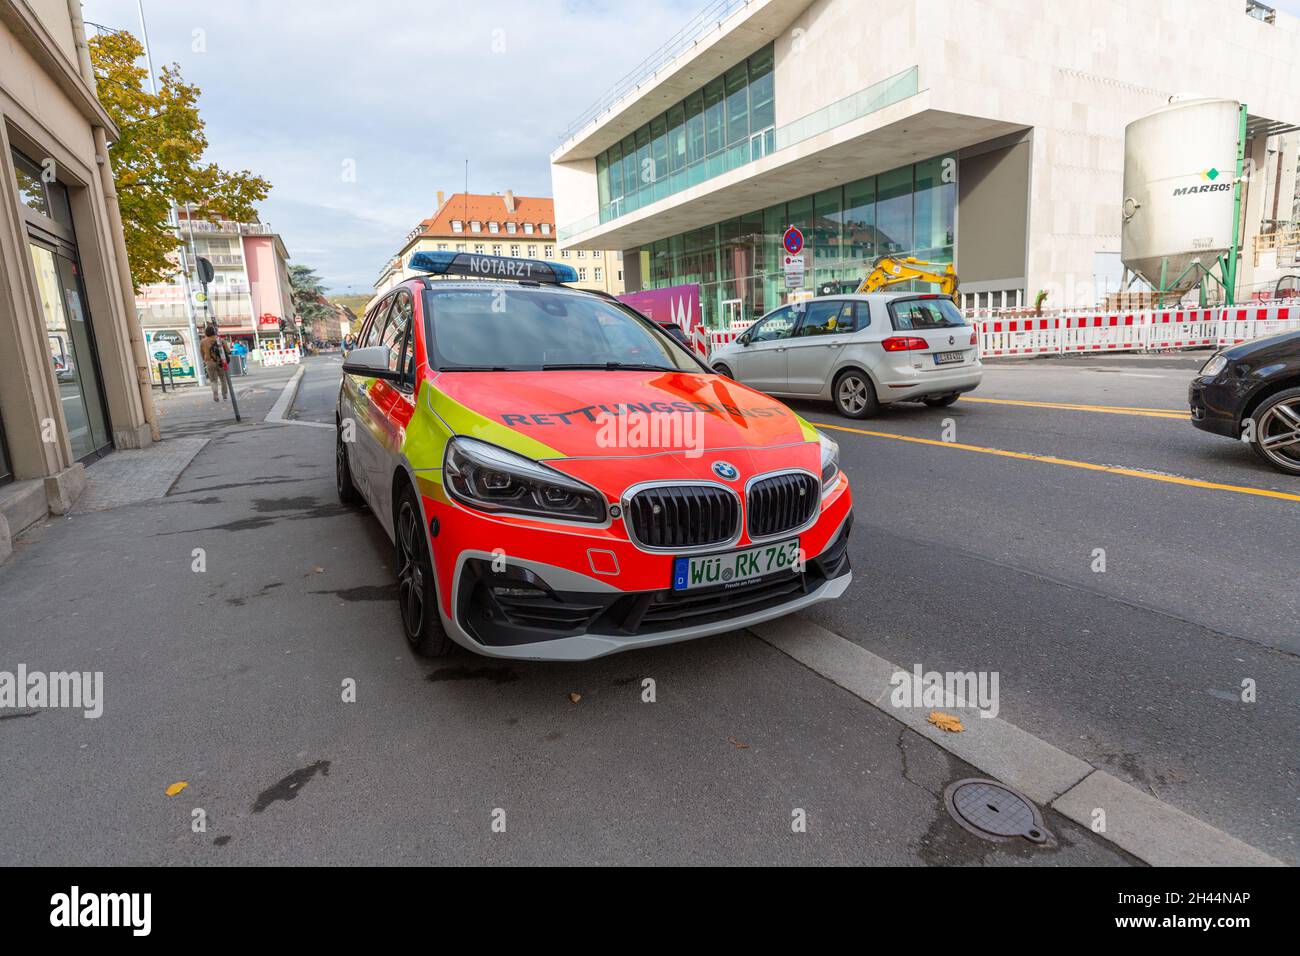 WUERZBURG, GERMANY - OCTOBER 31, 2021: A german Ambulance car from bavarian red cross stands near a street. Stock Photo